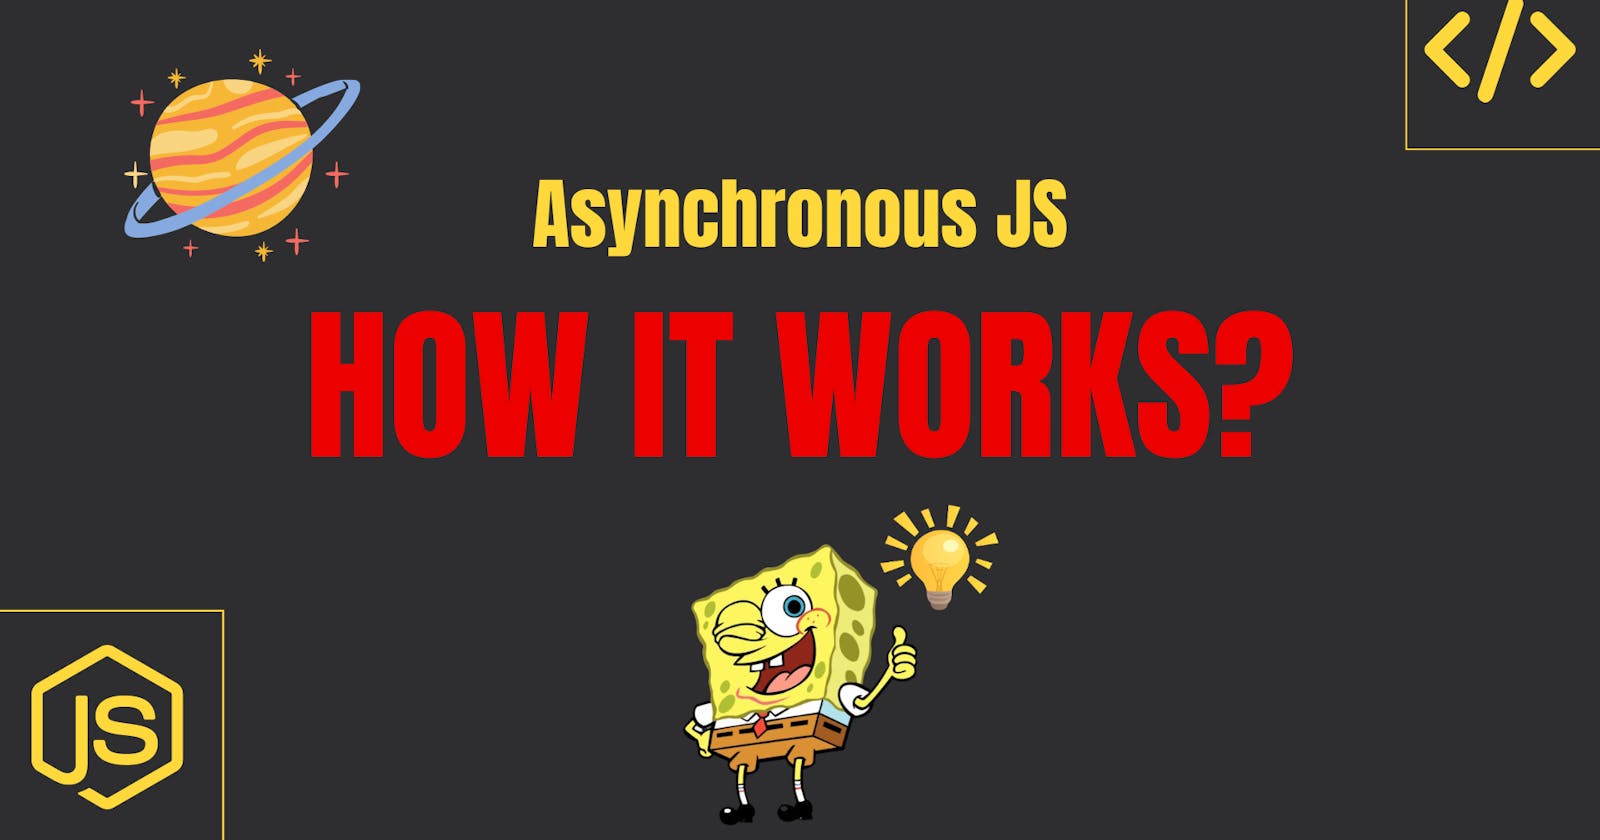 Master Asynchronous JavaScript Like a Pro (Easy Guide!)